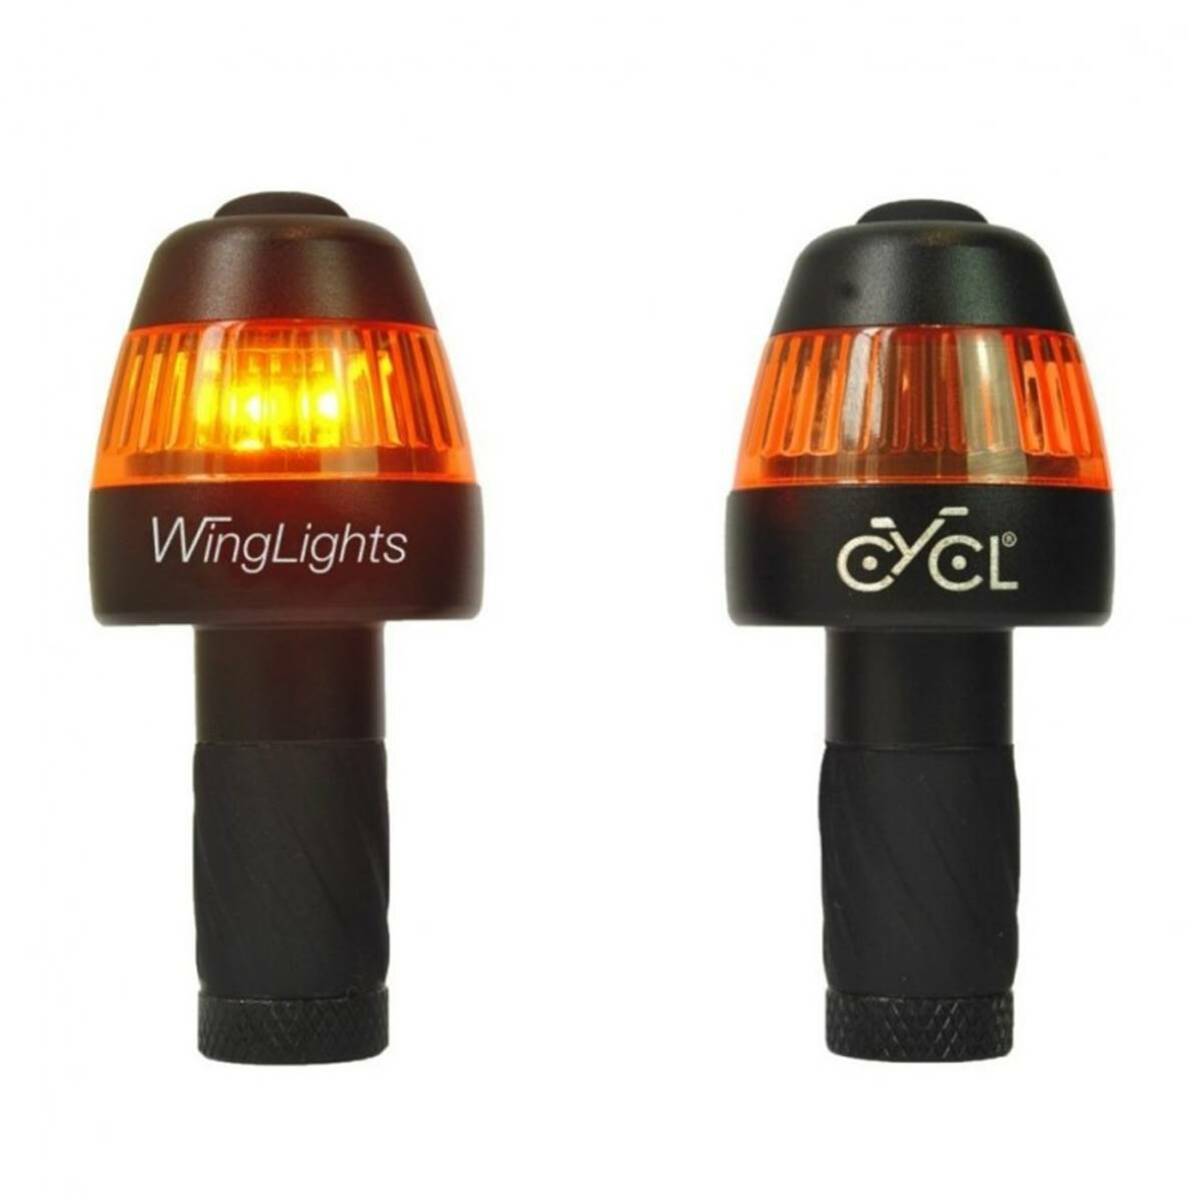 Image of Clignotants fixes pour vélo-trottinette Cycl winglights